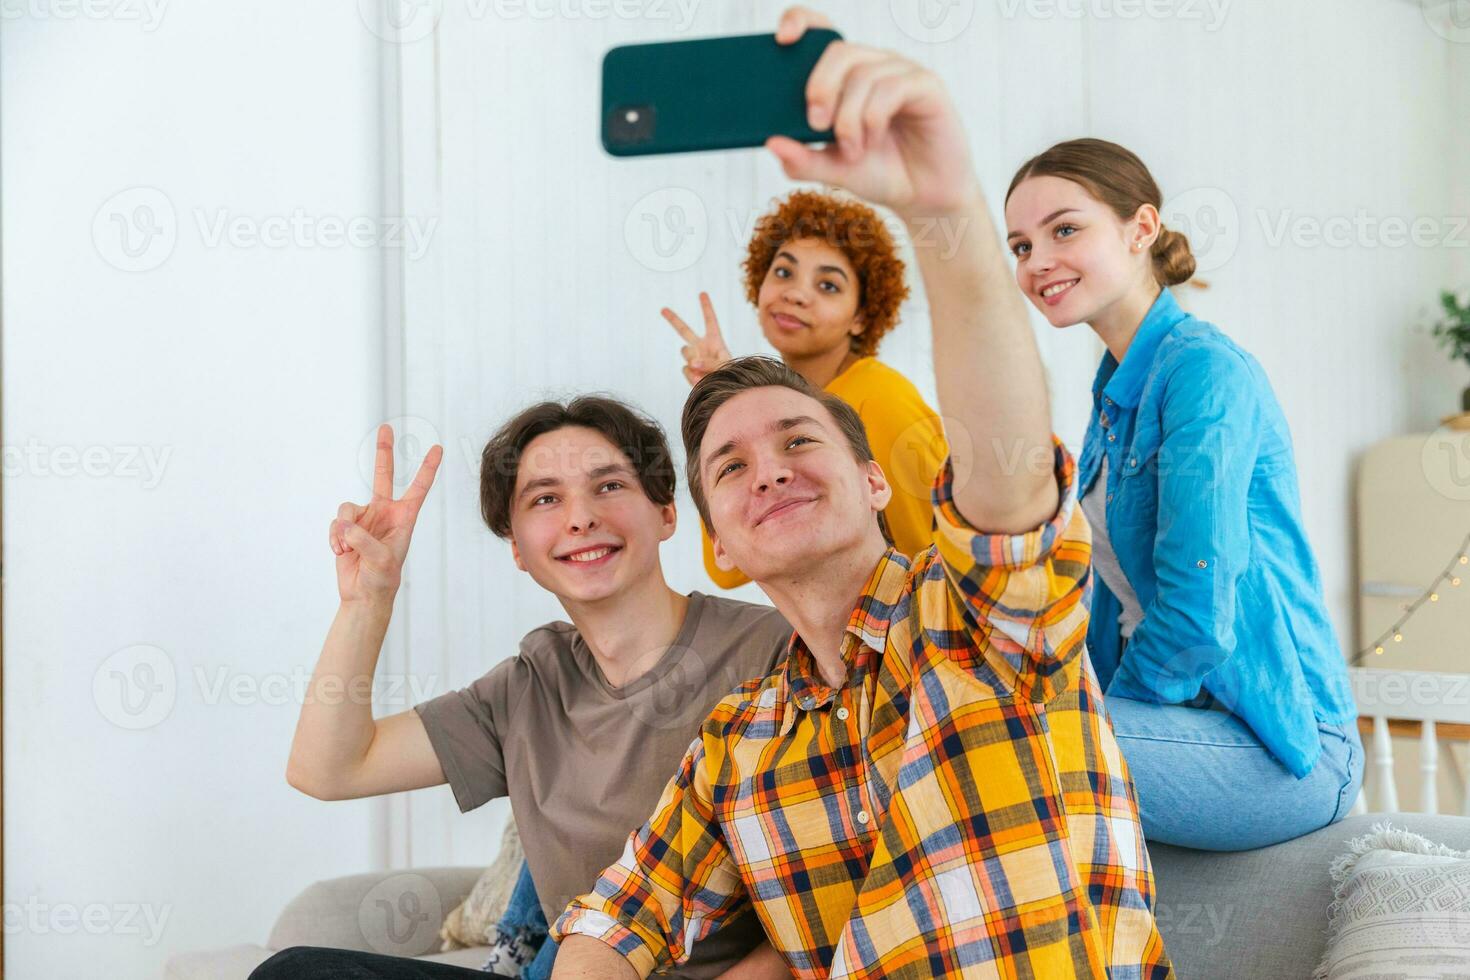 Cheers Funky mood. Happy group of friends make selfie. Man taking photo of friends at party. Group of multiracial young people taking photo on phone. Young people enjoy their company smile have fun.